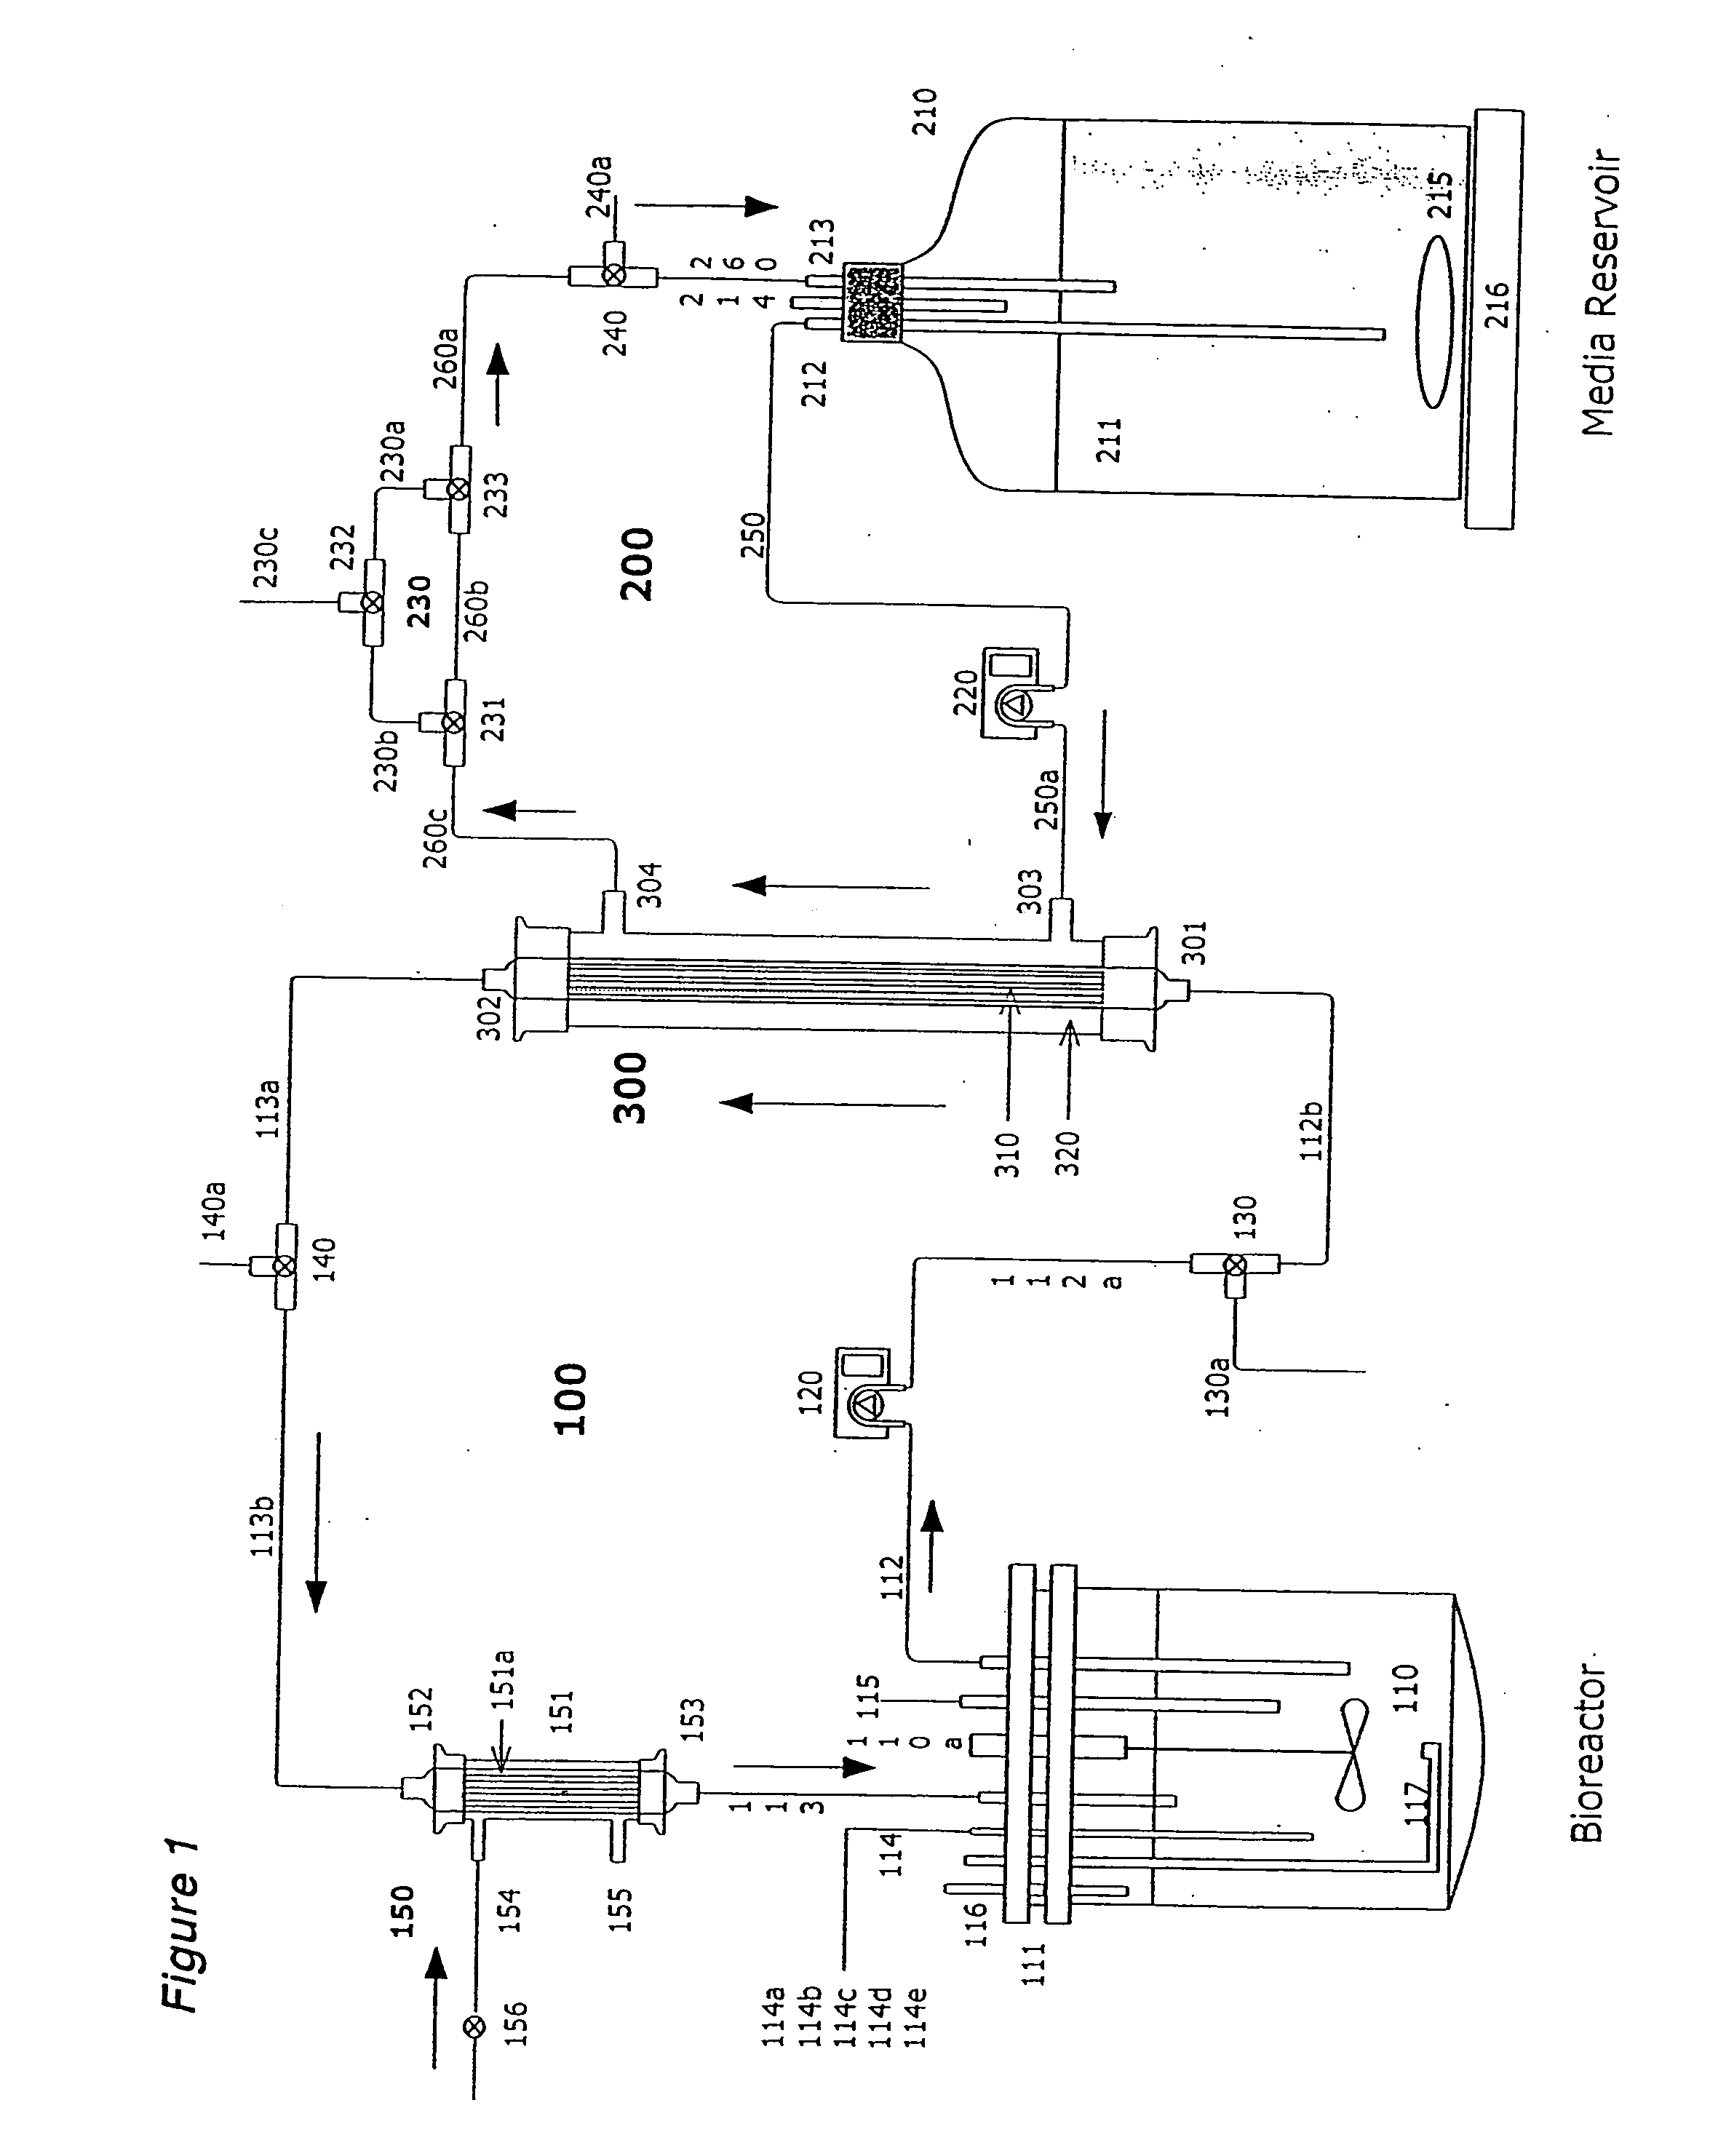 Apparatus and methods for producing and using high-density cells and products therefrom